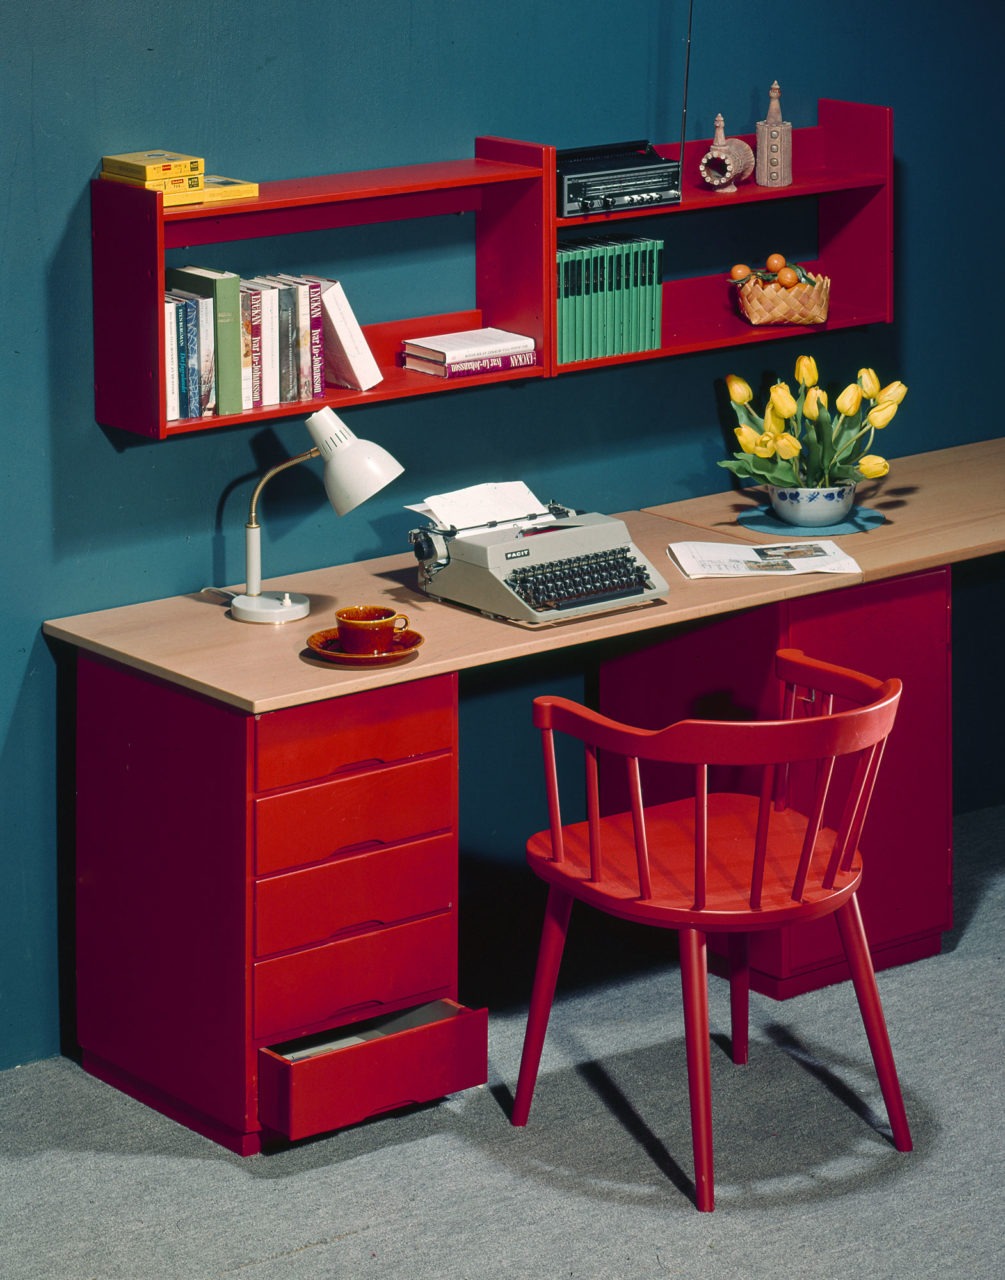 A desk with a top in light wood and other details – wall-mounted shelves, drawer units and nearby pin-back chair – in red.